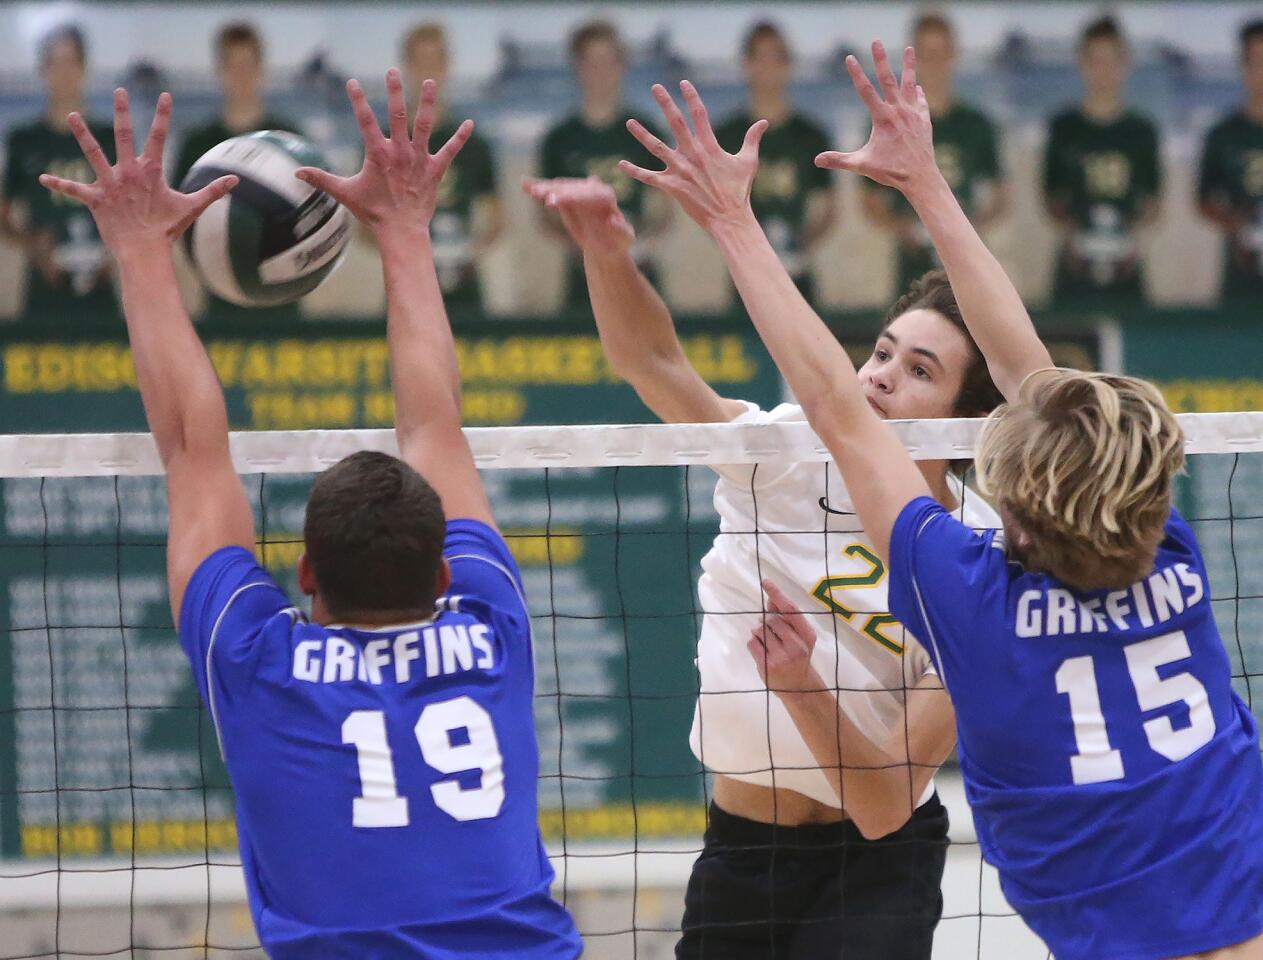 Edison's Caden Satterfield (22) kills the ball past Los Alamitos' blockers Eric Allen (19) Erik Weissinger (15) during Wave League volleyball match on Friday.